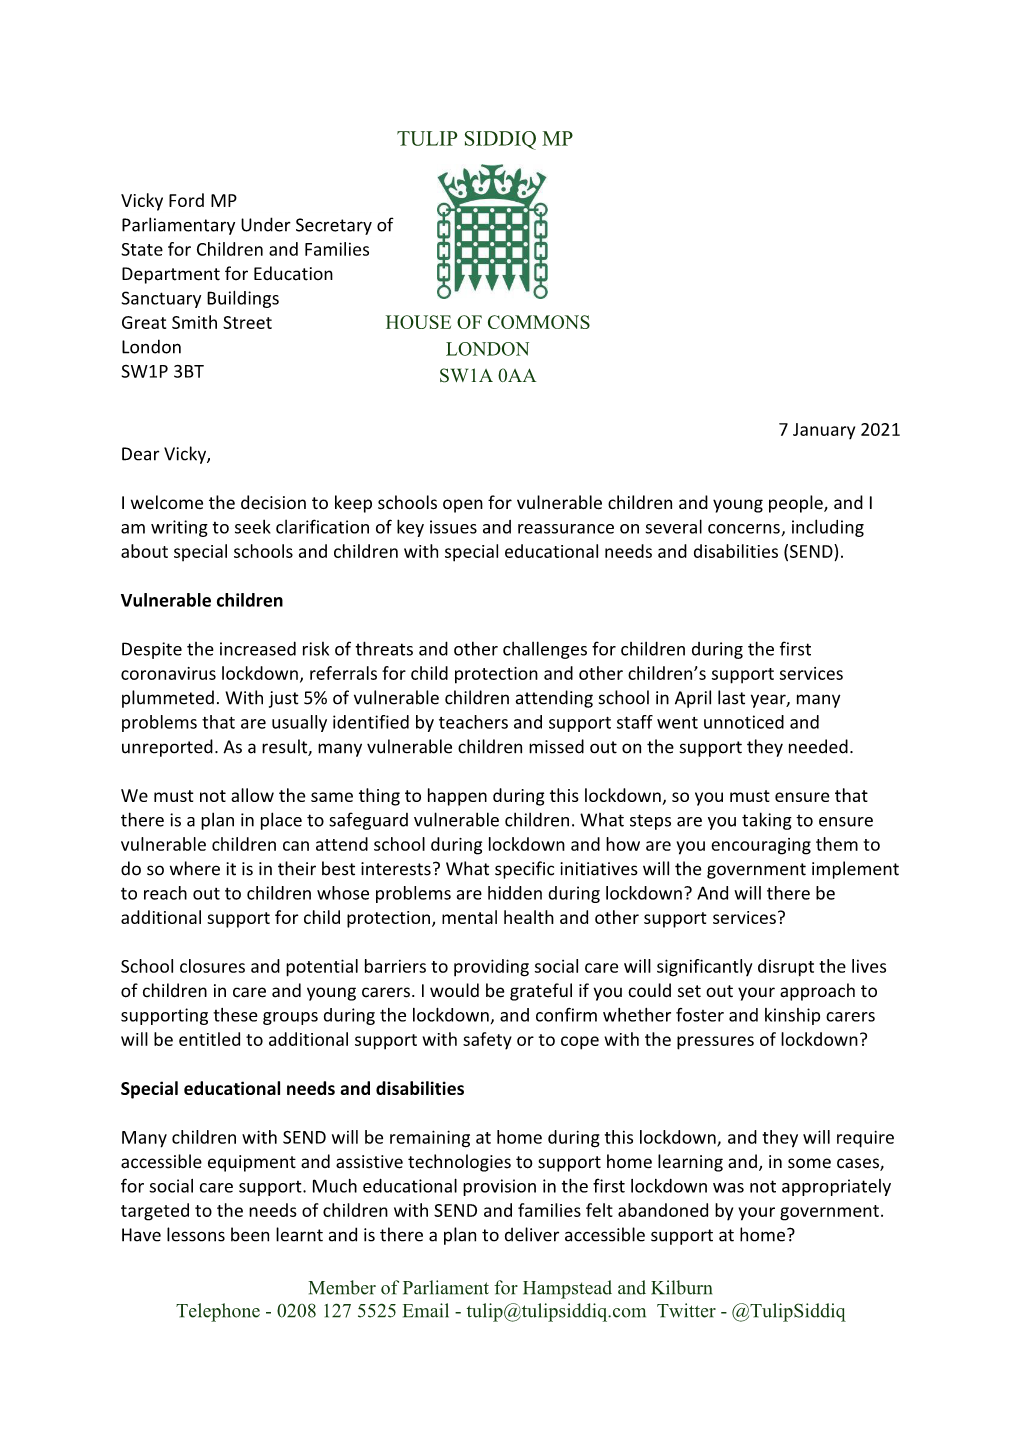 20210107 Letter to Vicky Ford on Vulnerable Children and SEND Copy